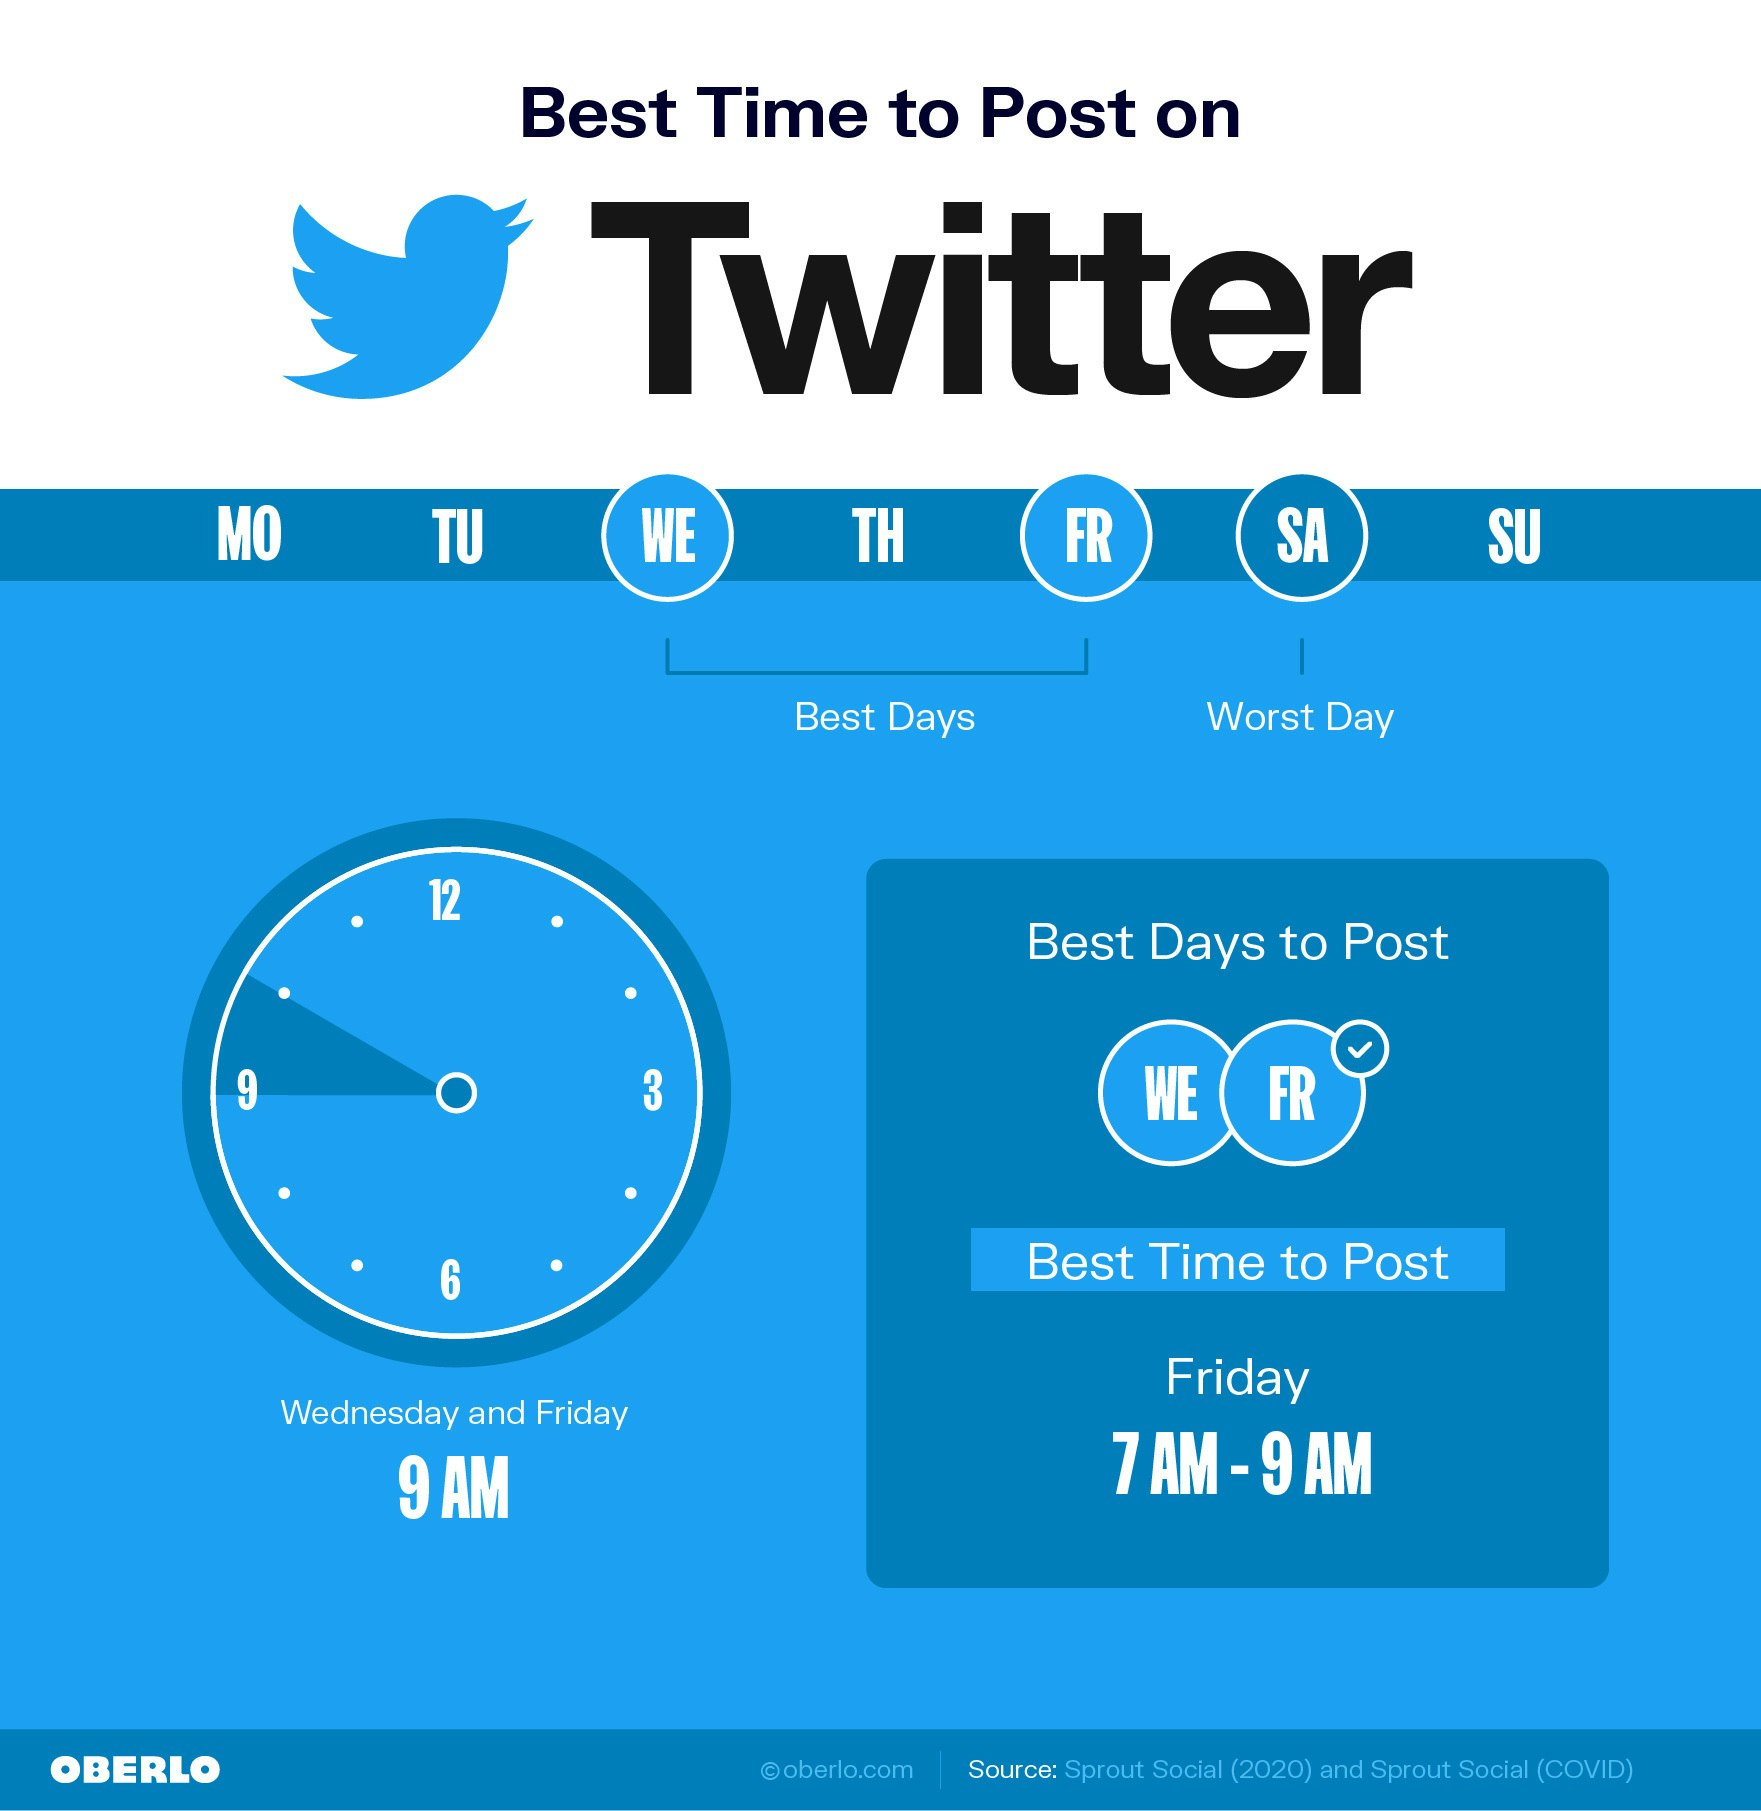 Best time to post on Twitter